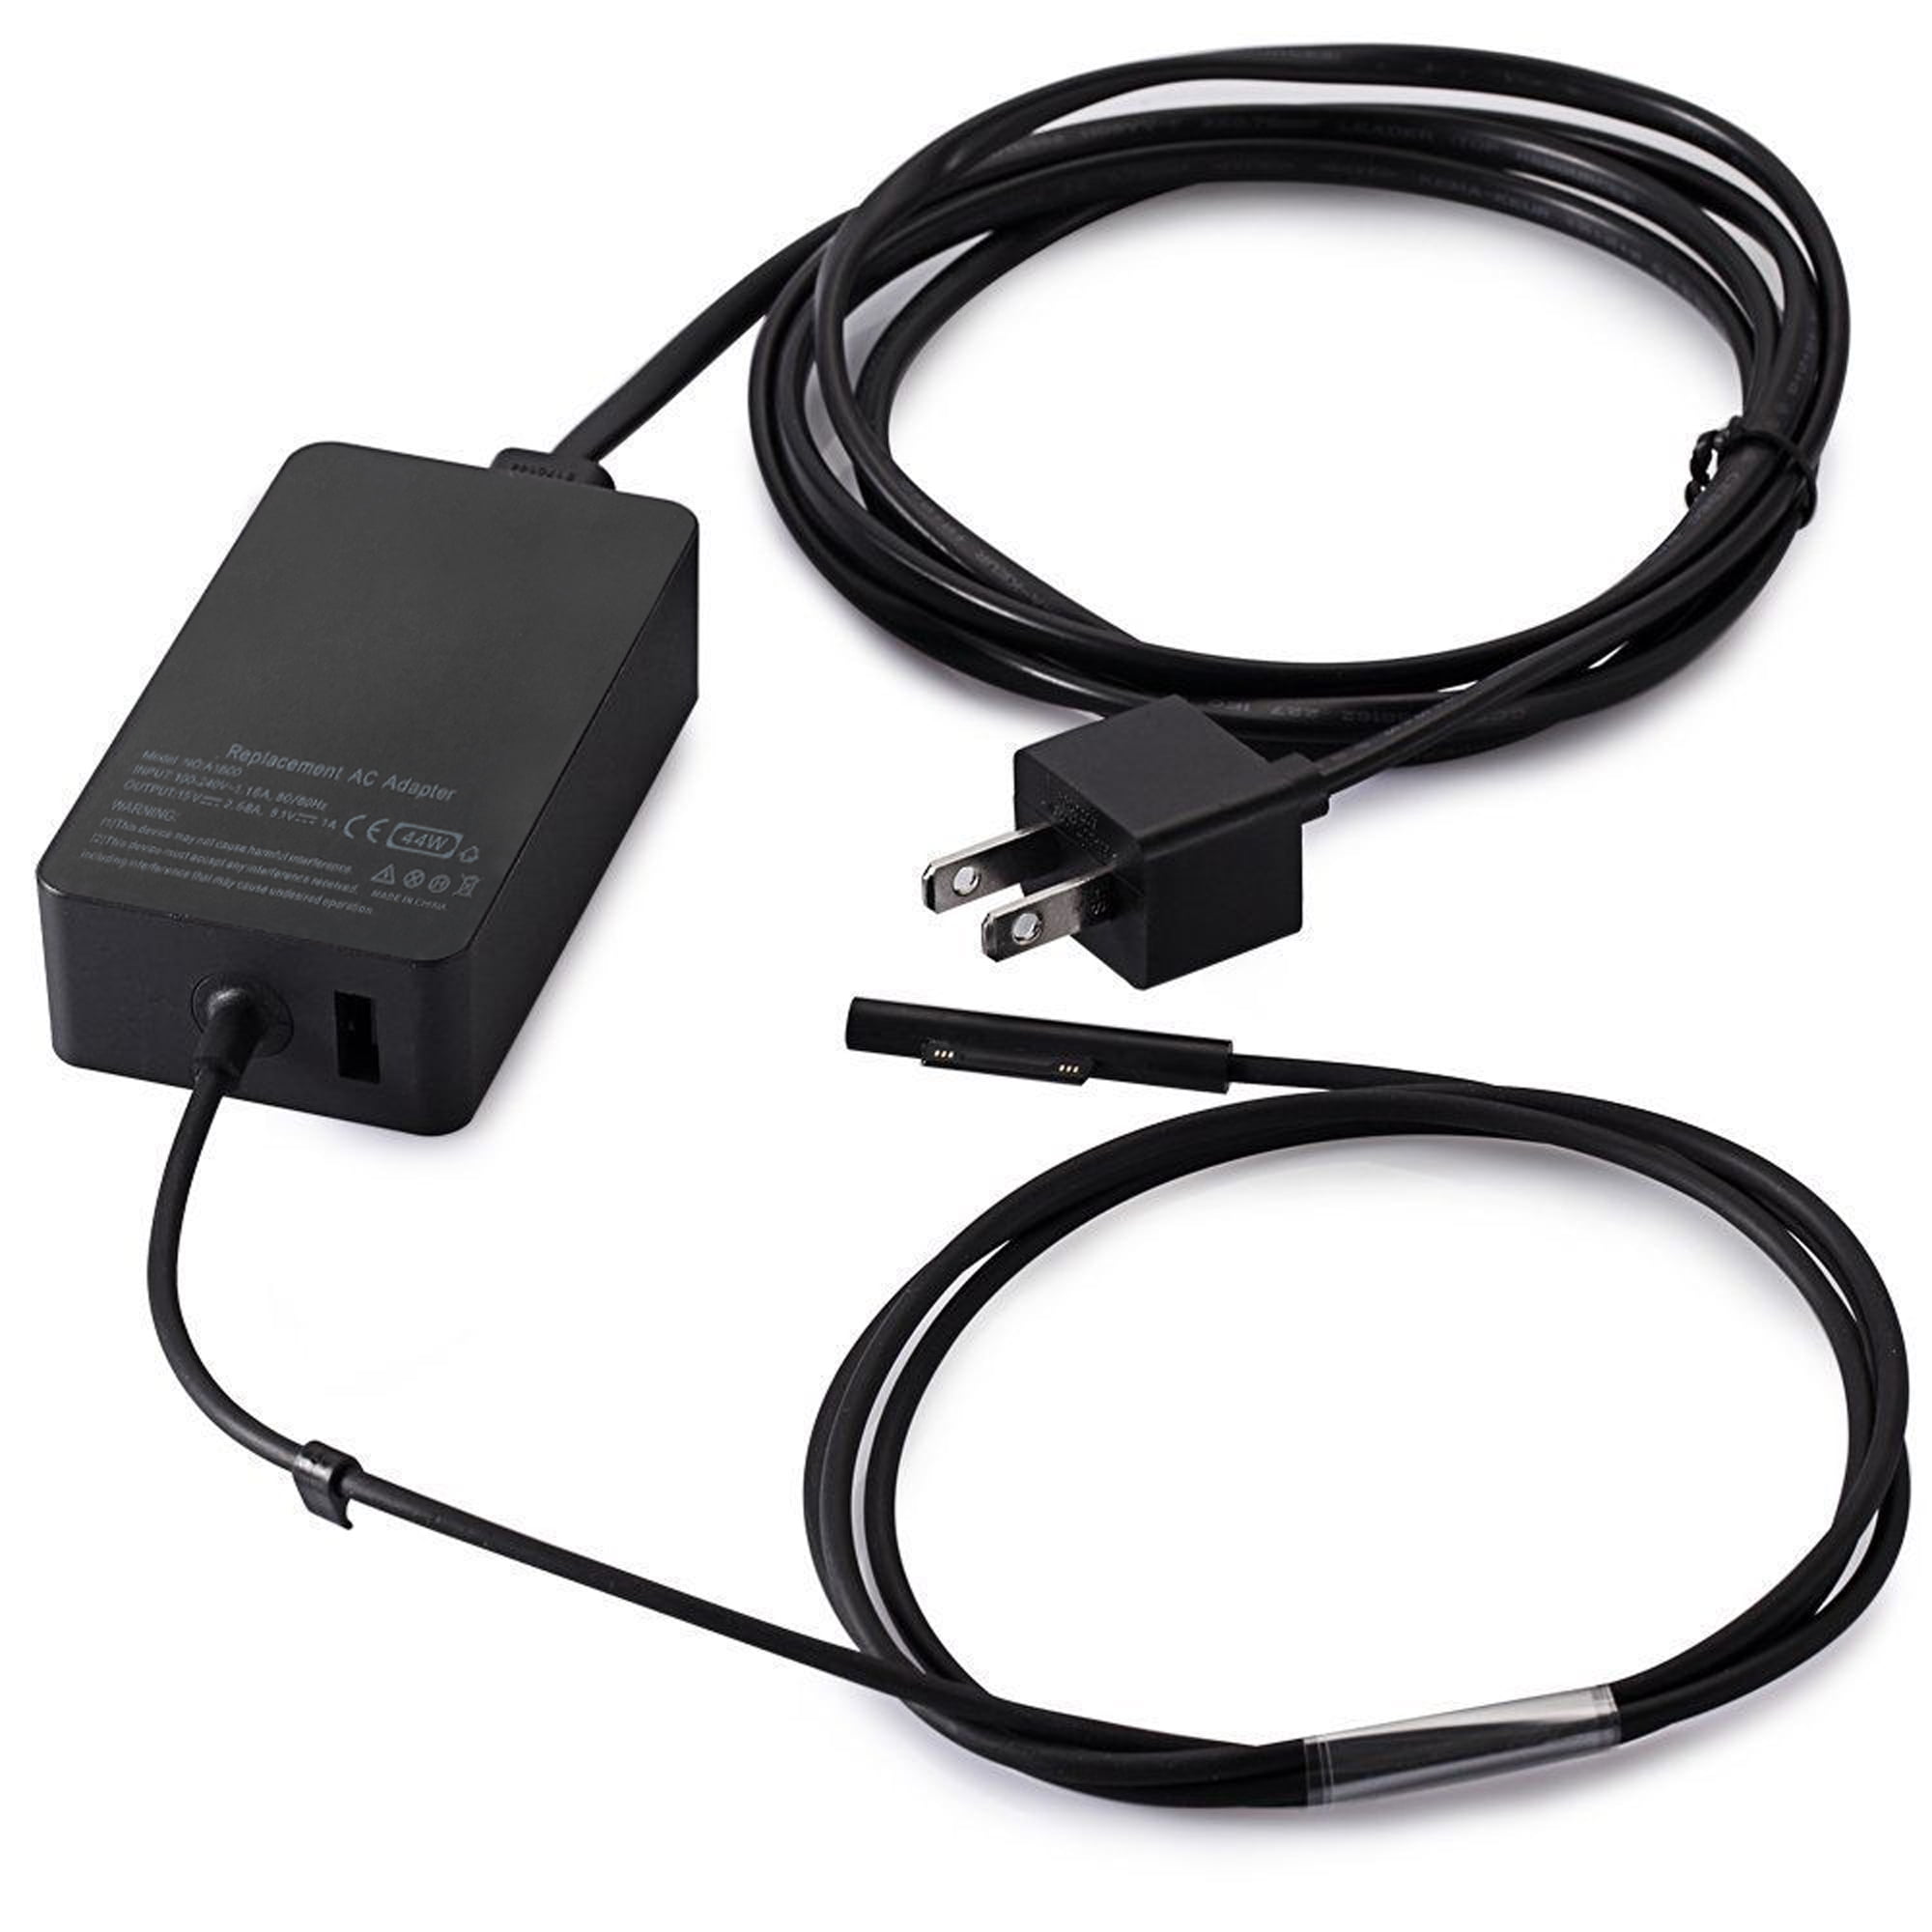 2.58A AC power charger for surface Pro 4 Pro 5 Tablet and Surface Laptop with 5V USB Charging Port - Walmart.com